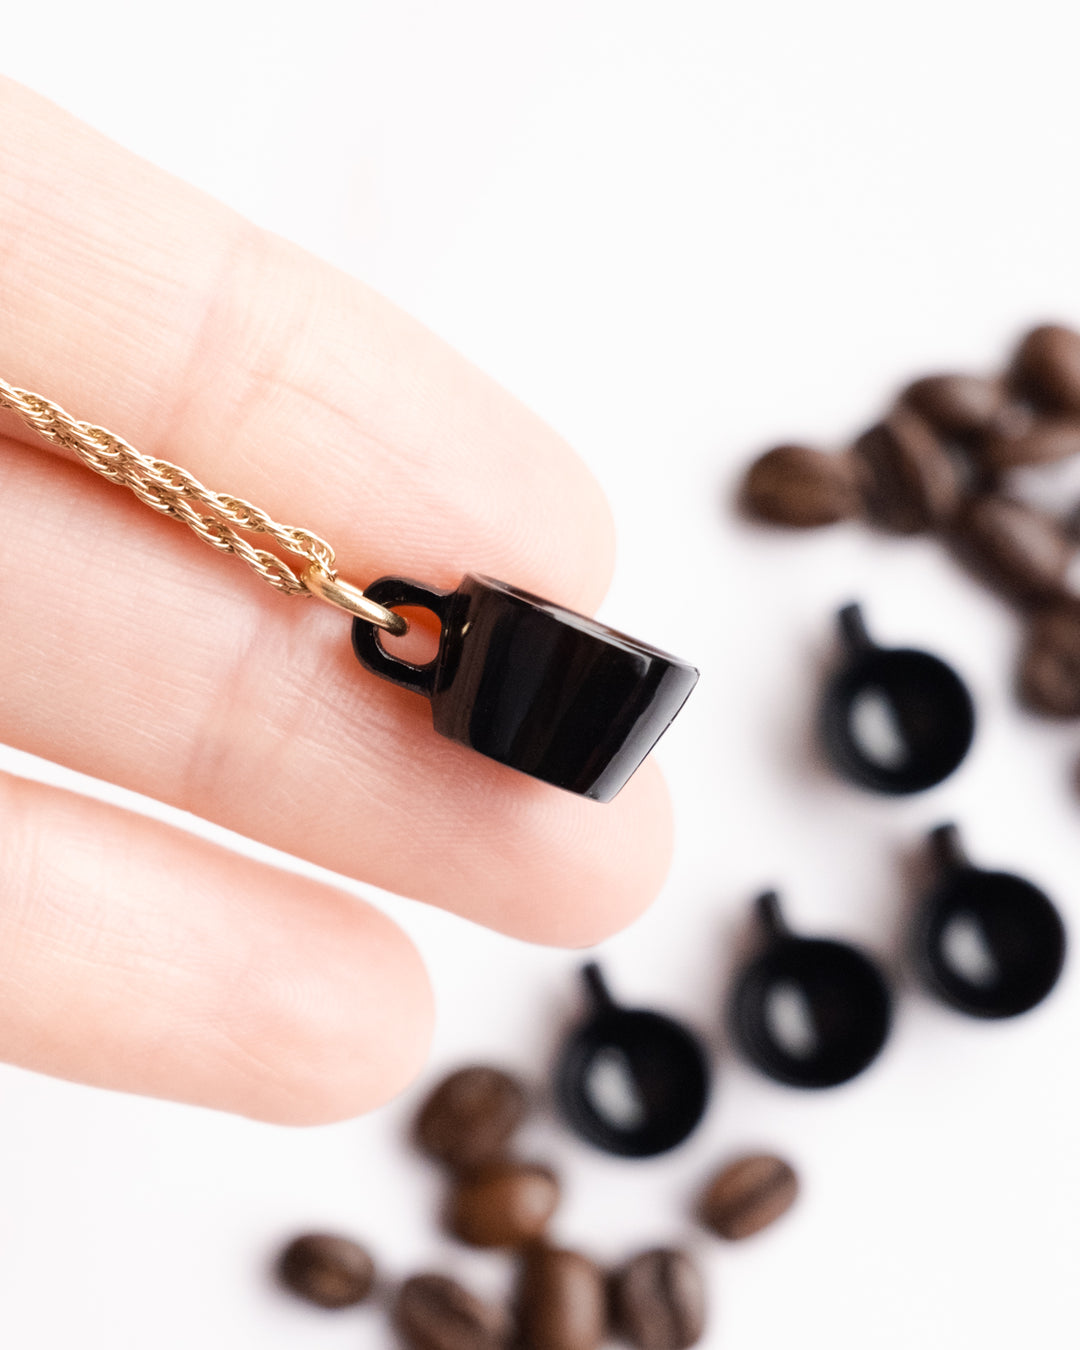 Black Onyx Hand Carved Mug Necklace - The Healing Pear